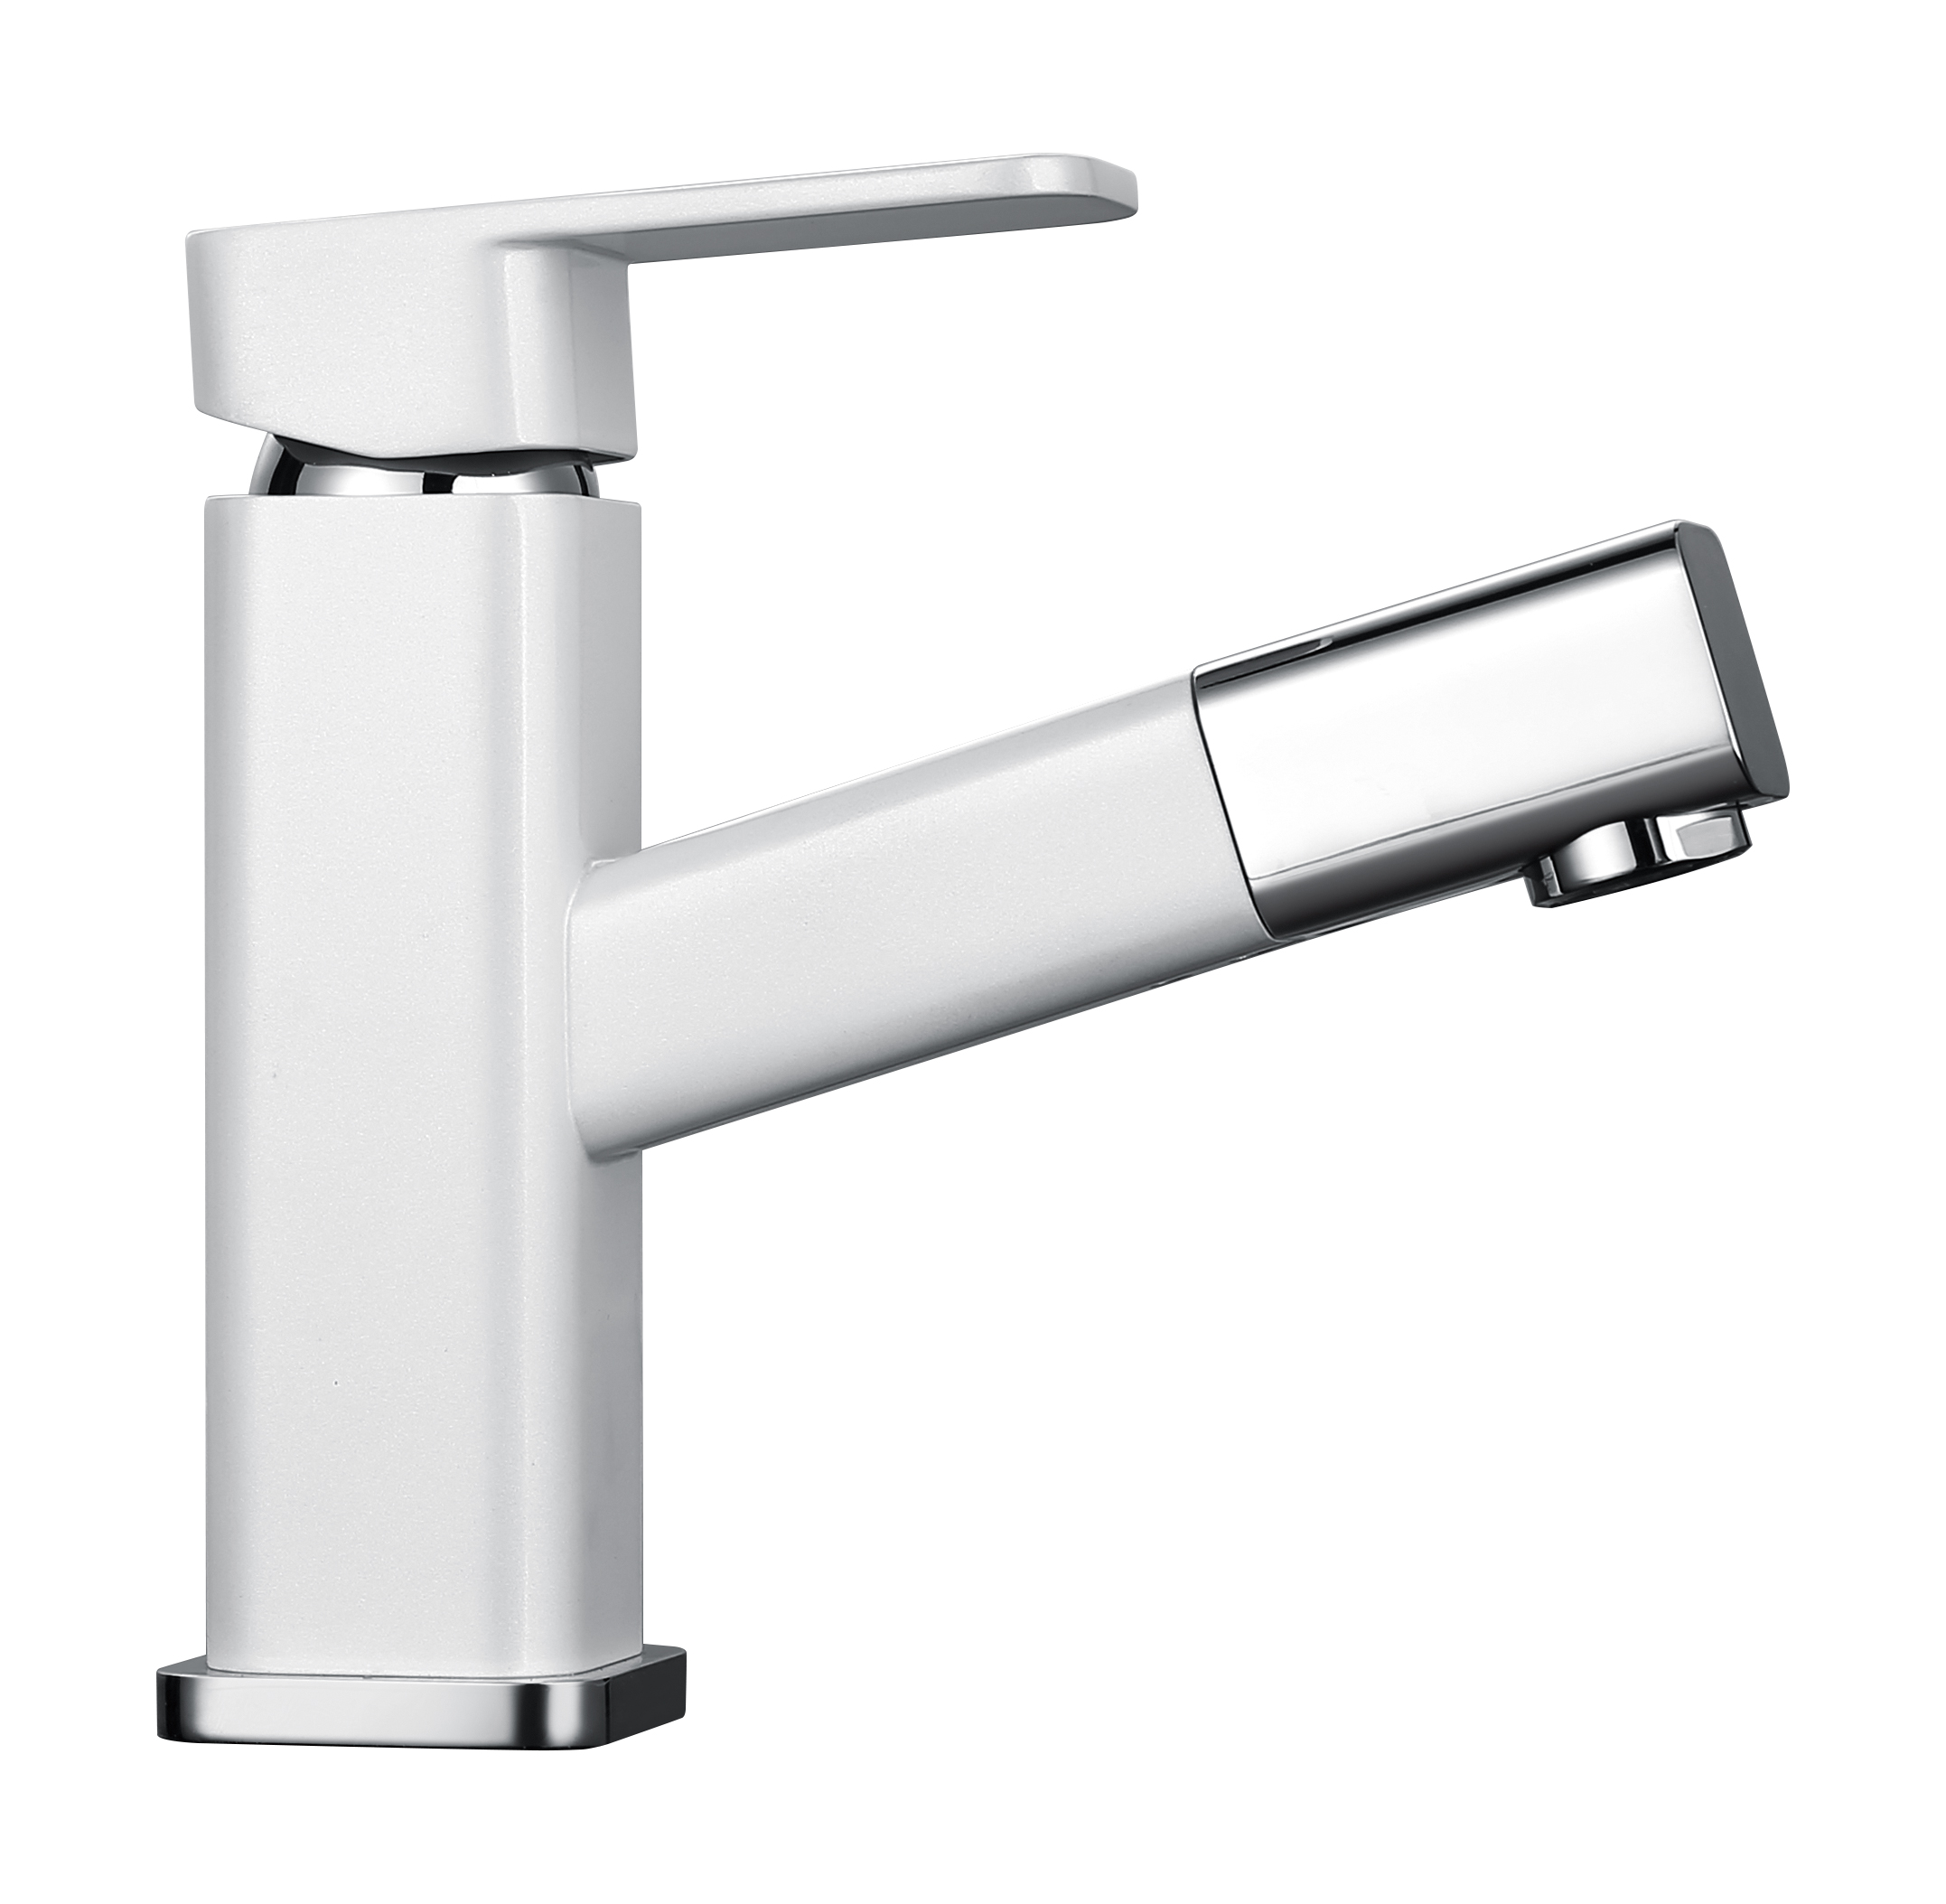 Arcora White Bathroom Pull Down Vessel Sink Faucet, Lavatory Single Hole Single Handle Basin Sink Mixer Tap with Pull Out Sprayer